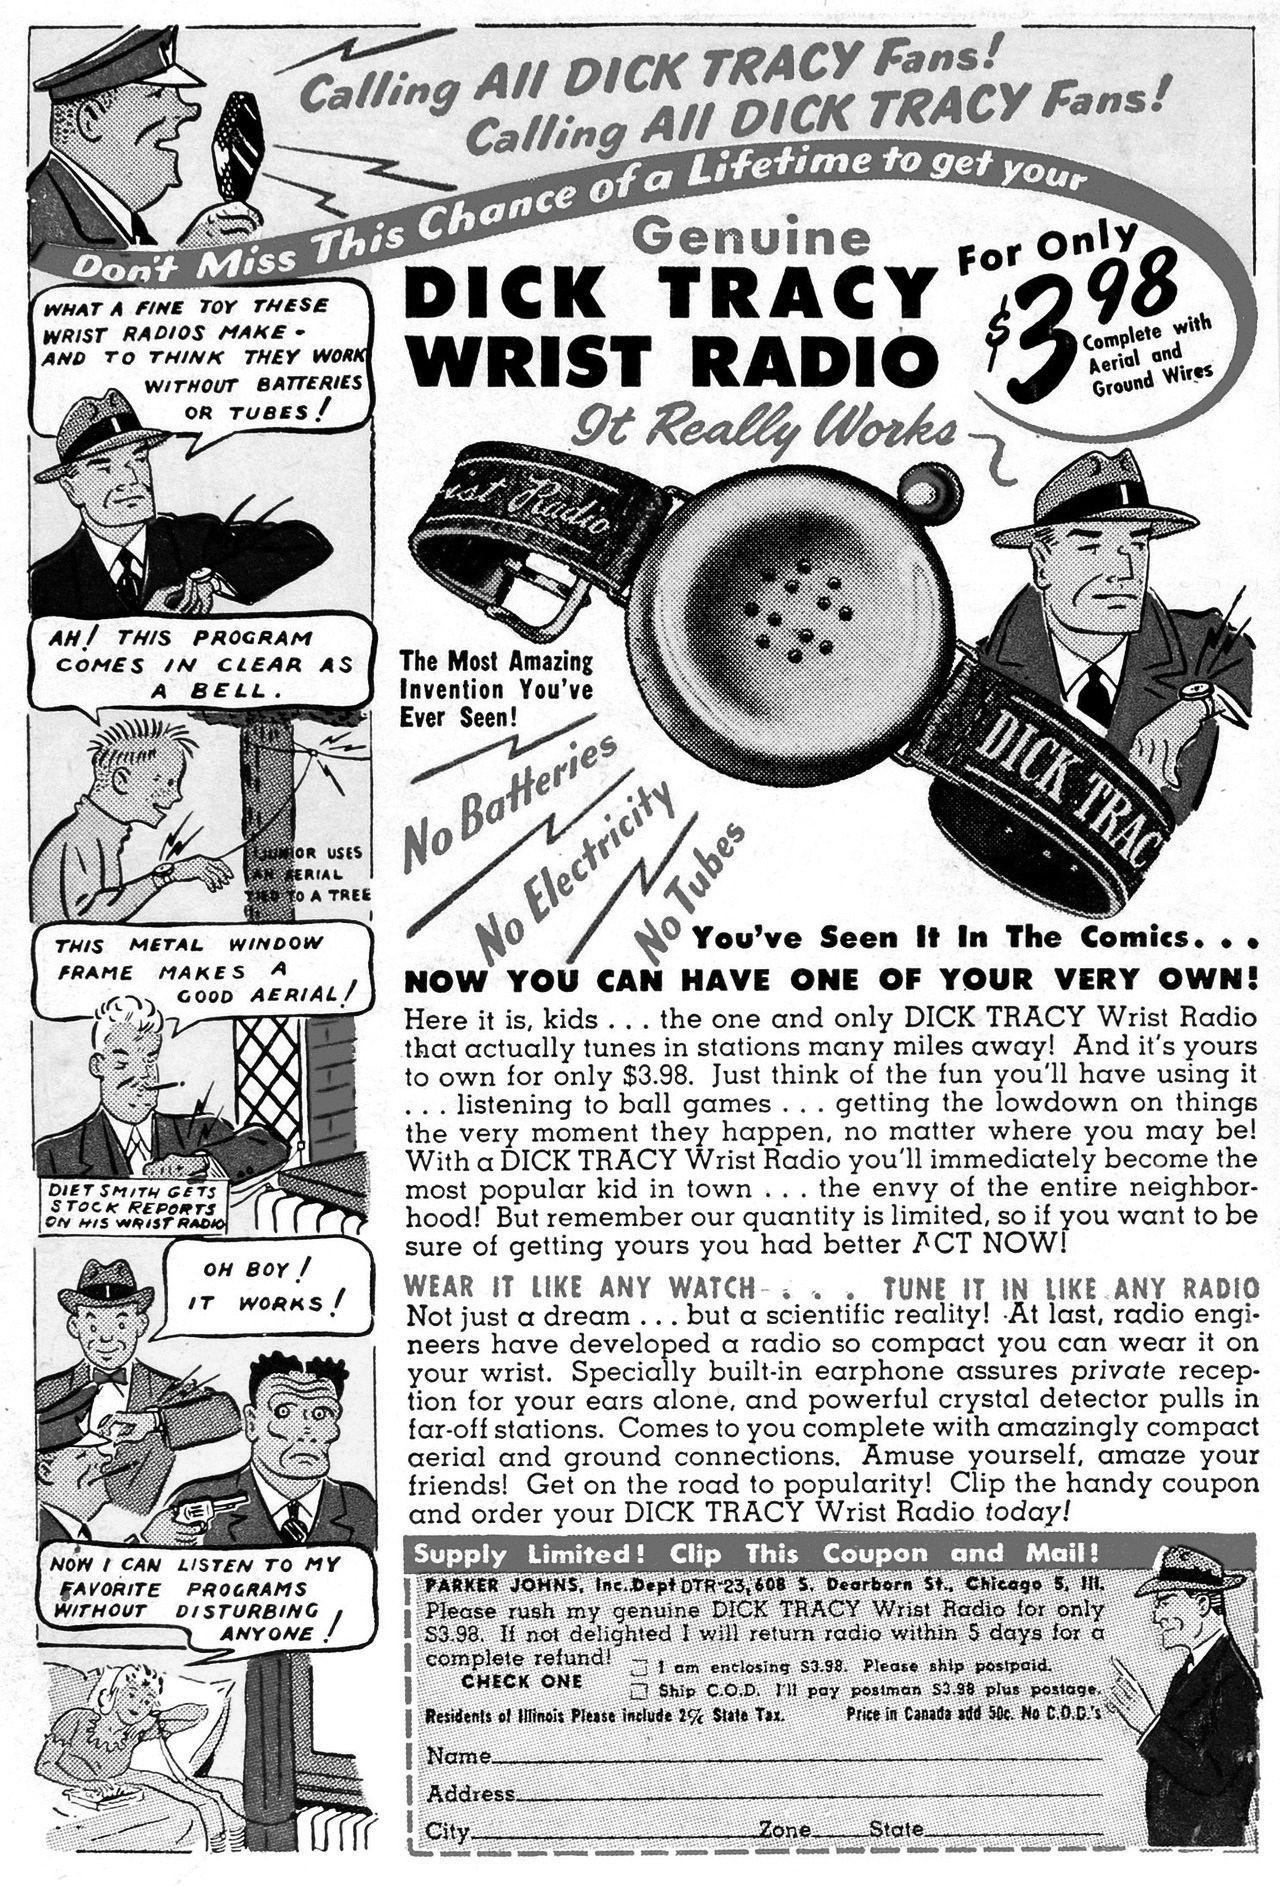 An advertisement for a Dick Tracy wrist radio.